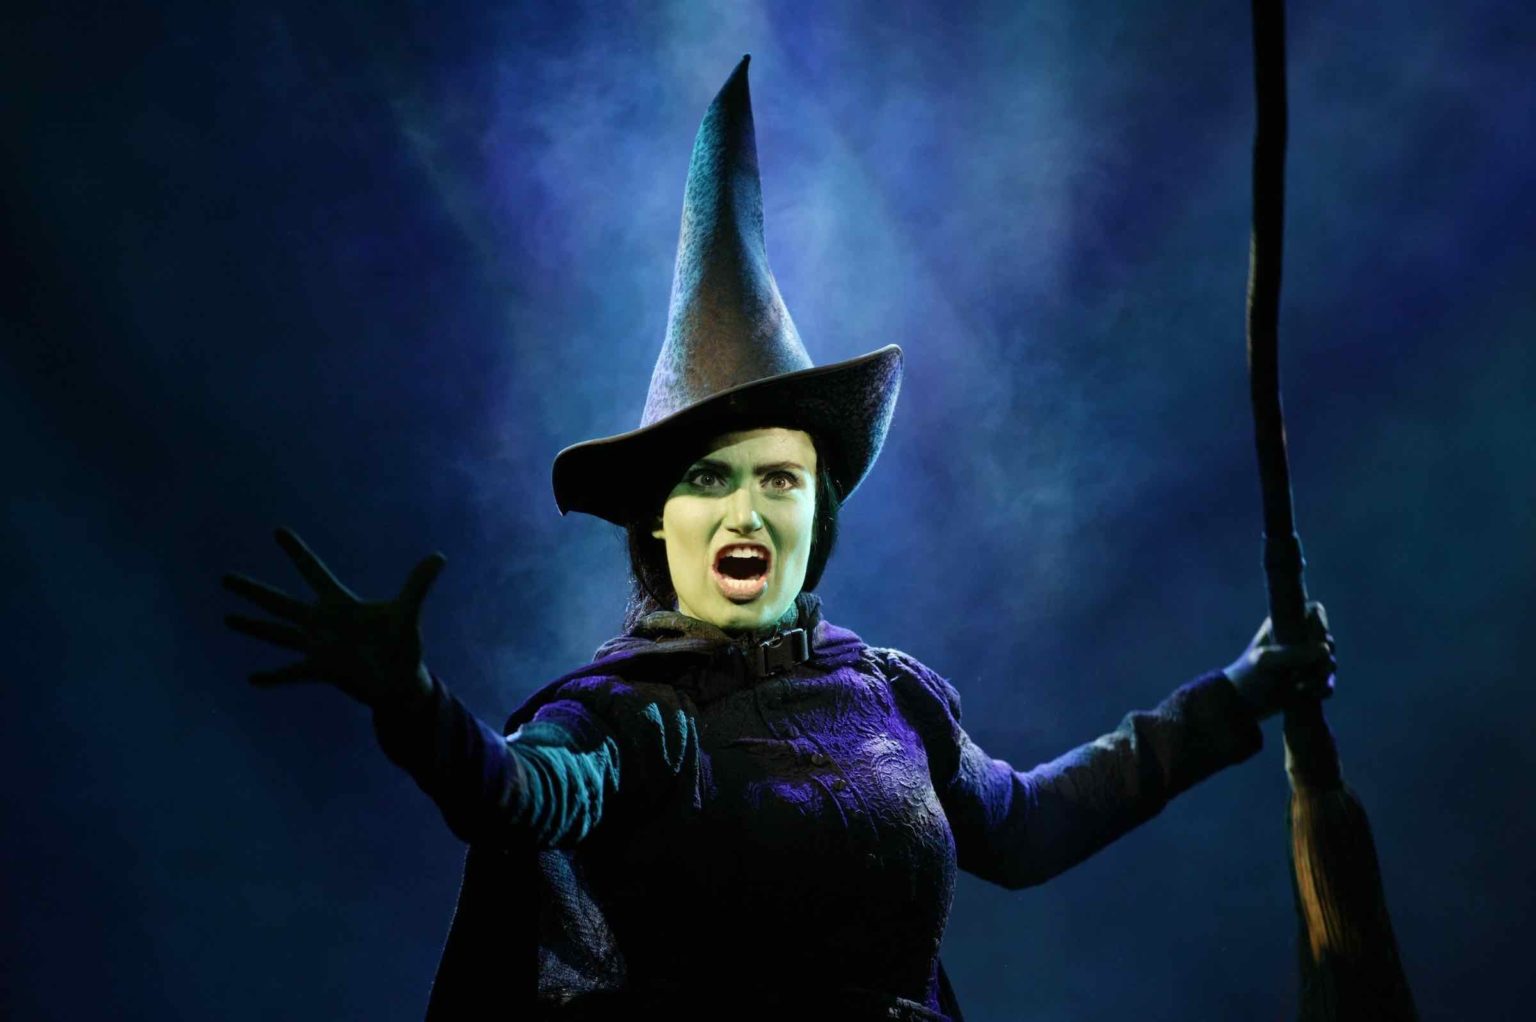 We have only one question for Universal Studios: Where’s the 'Wicked' movie you promised us? Here's what we know about the 'Wicked' movie.